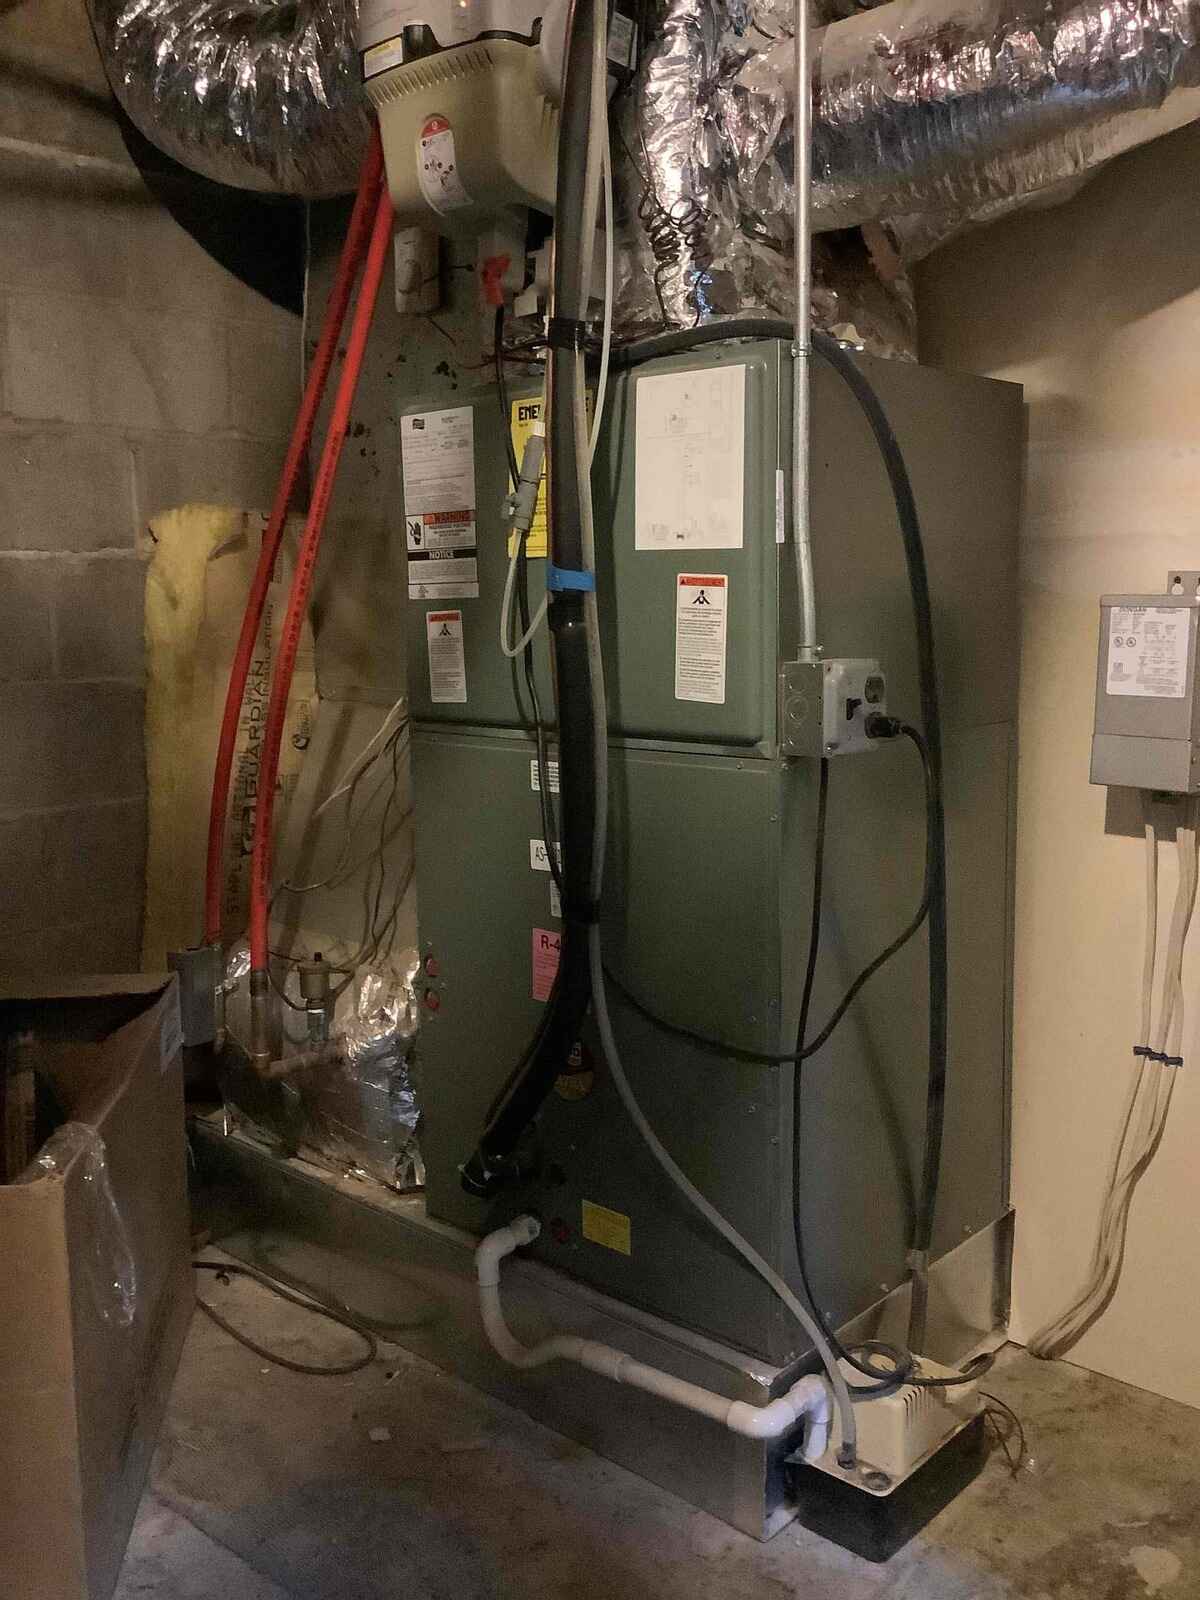 Old air handler system in a basement